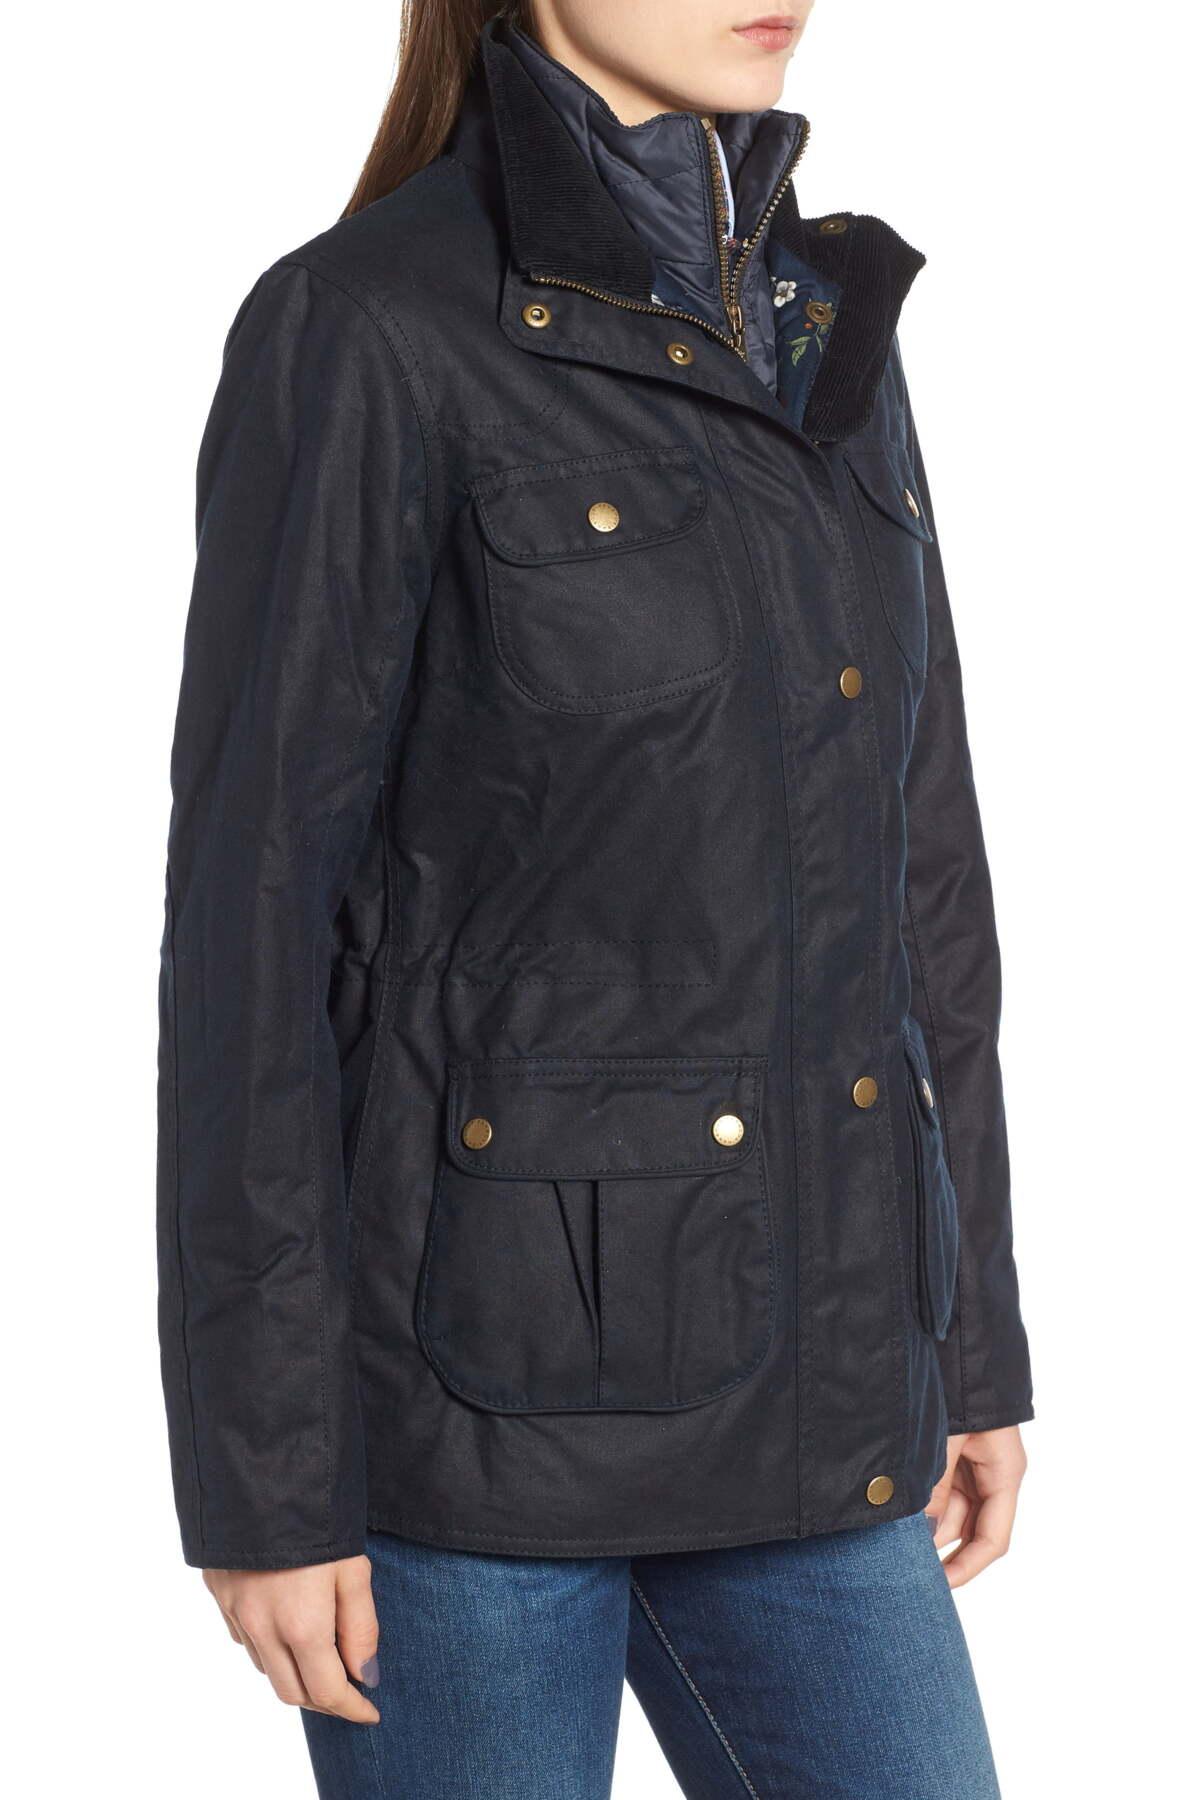 Barbour Chaffinch on Sale, 64% OFF | www.cartenztactical.com